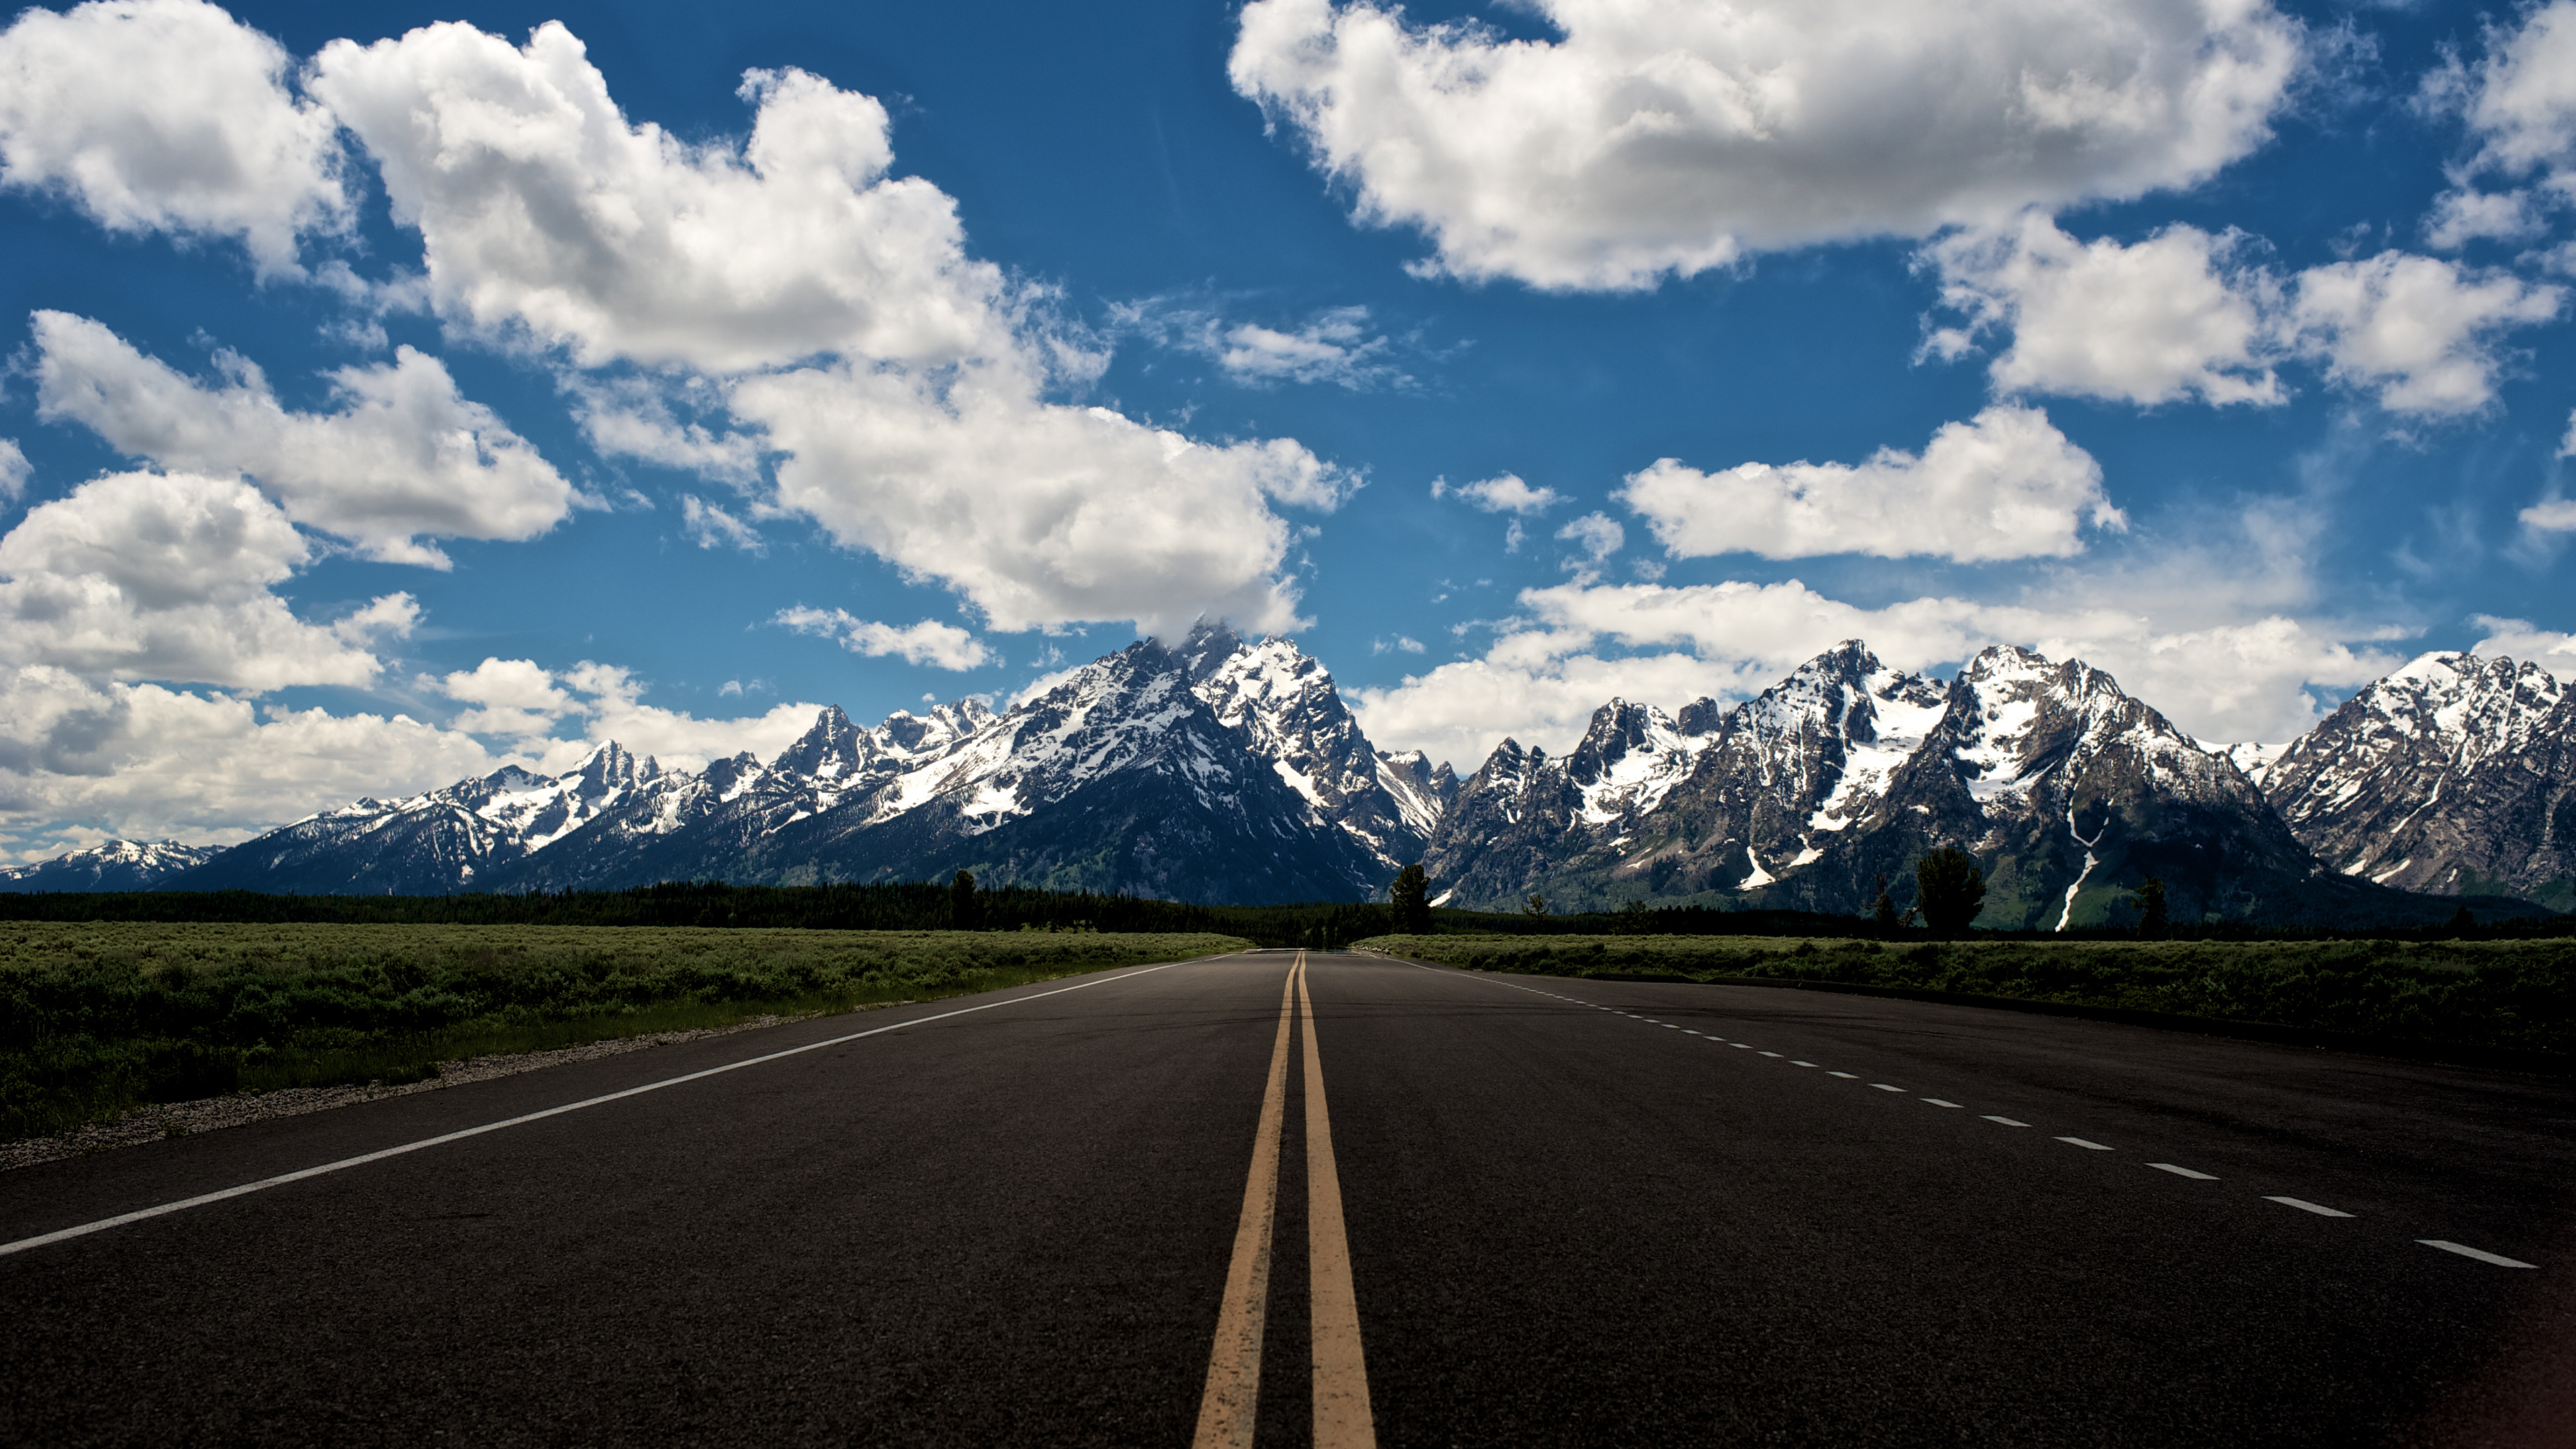 Empty Lanes, Highway, Rocky Mountains With Snow, Blue Sky And White